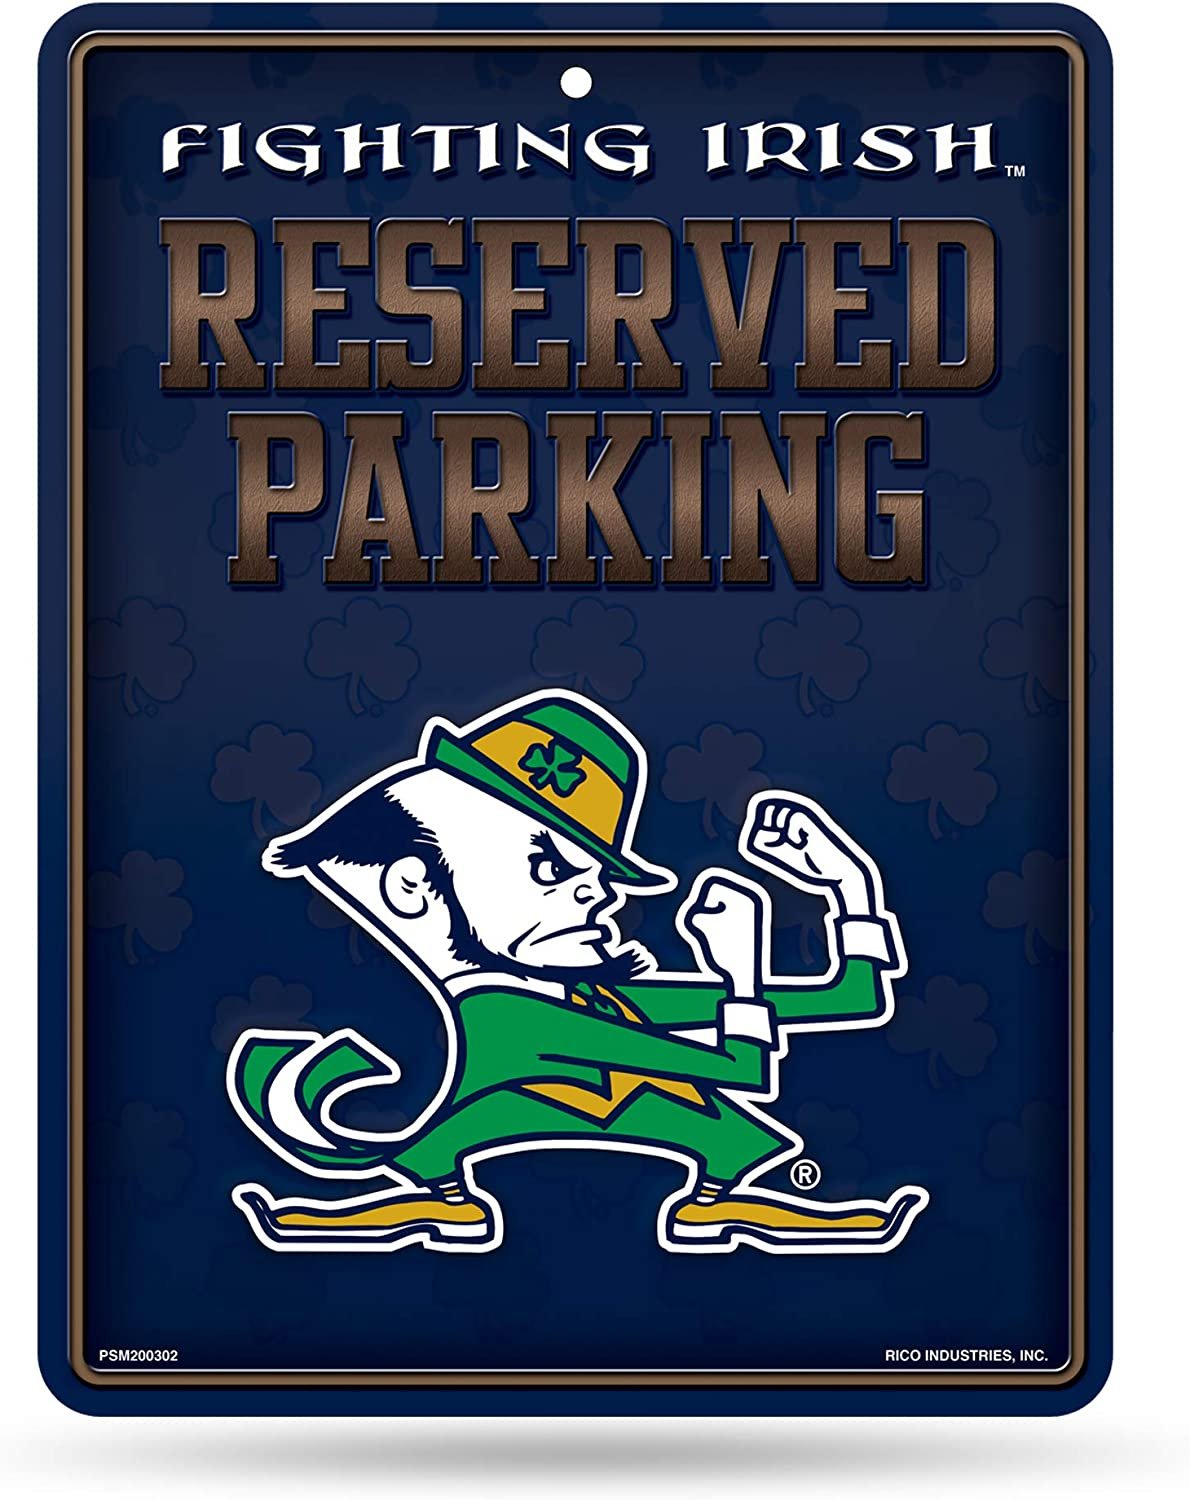 University of Notre Dame Fighting Irish 8-inch by 11-inch Metal Parking Sign Décor